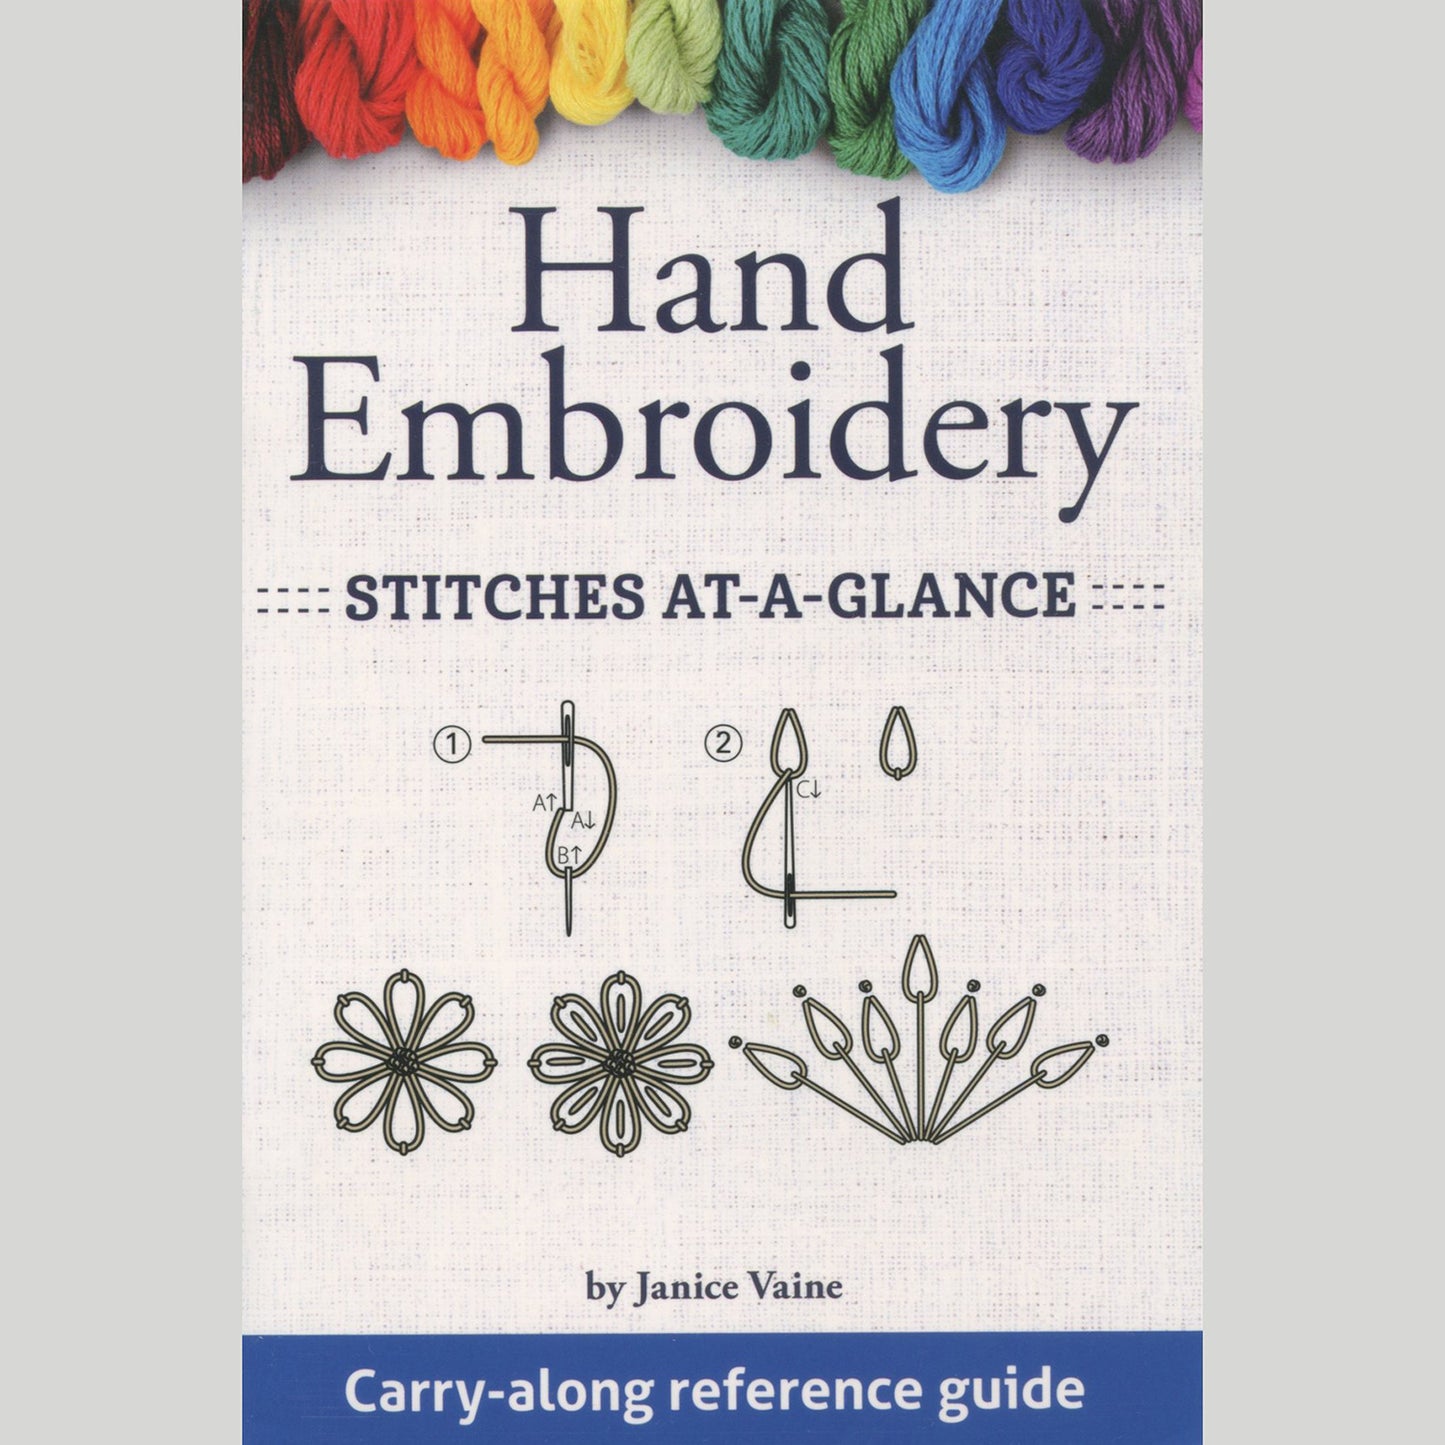 Hand Embroidery Stitches At-A-Glance Book Primary Image